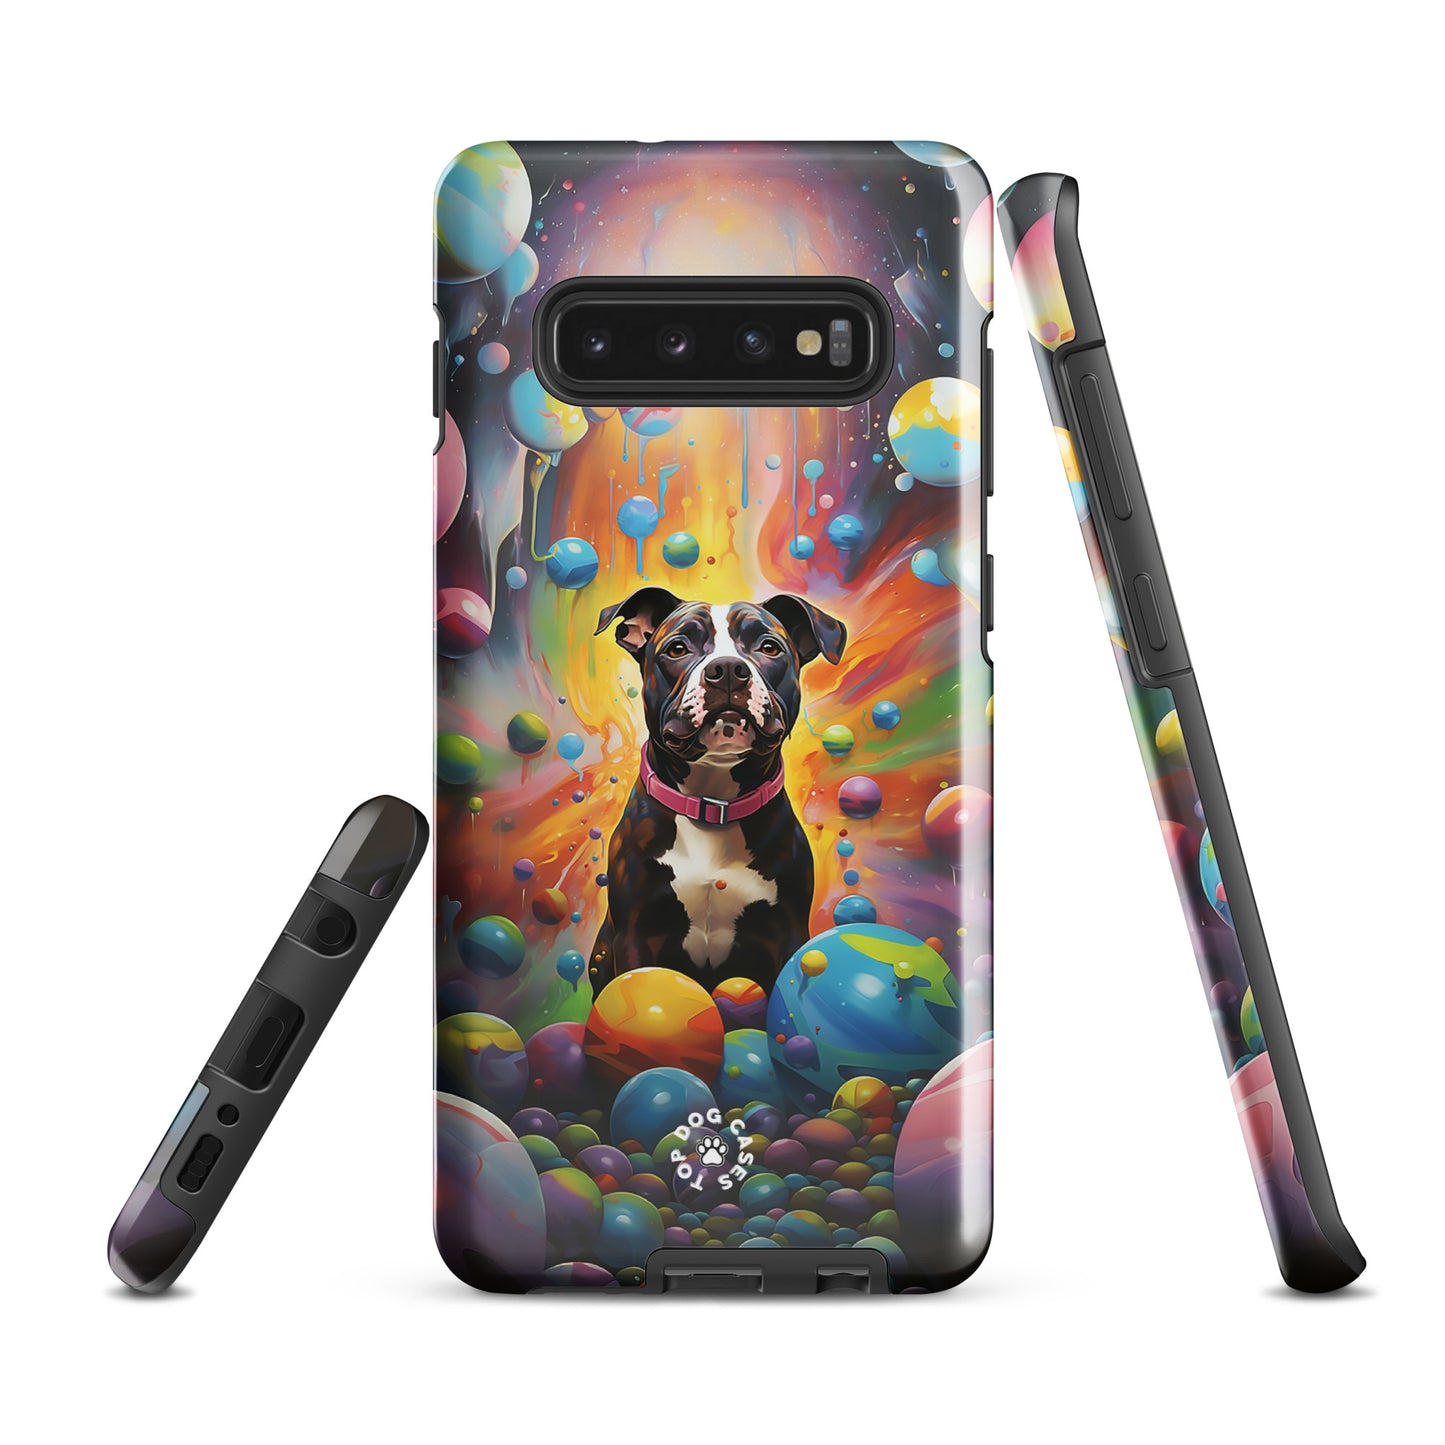 Pitbull Galaxy Edition Tough Case for Samsung - Top Dog Cases - #CuteDog, #CuteDogs, #DogInSpace, #DogPhoneCase, #Pitbull, #Samsung, #SamsungGalaxy, #SamsungGalaxyCase, #SamsungGalaxyS10, #SamsungGalaxyS20, #SamsungGalaxyS21, #SamsungGalaxyS22, #SamsungGalaxyS22Ultra, #SamsungGalaxyS23, #SamsungGalaxyS23Plus, #SamsungGalaxyS23Ultra, #SamsungPhoneCase, SamsungGalaxyS20Plus, SamsungGalaxyS22Plus